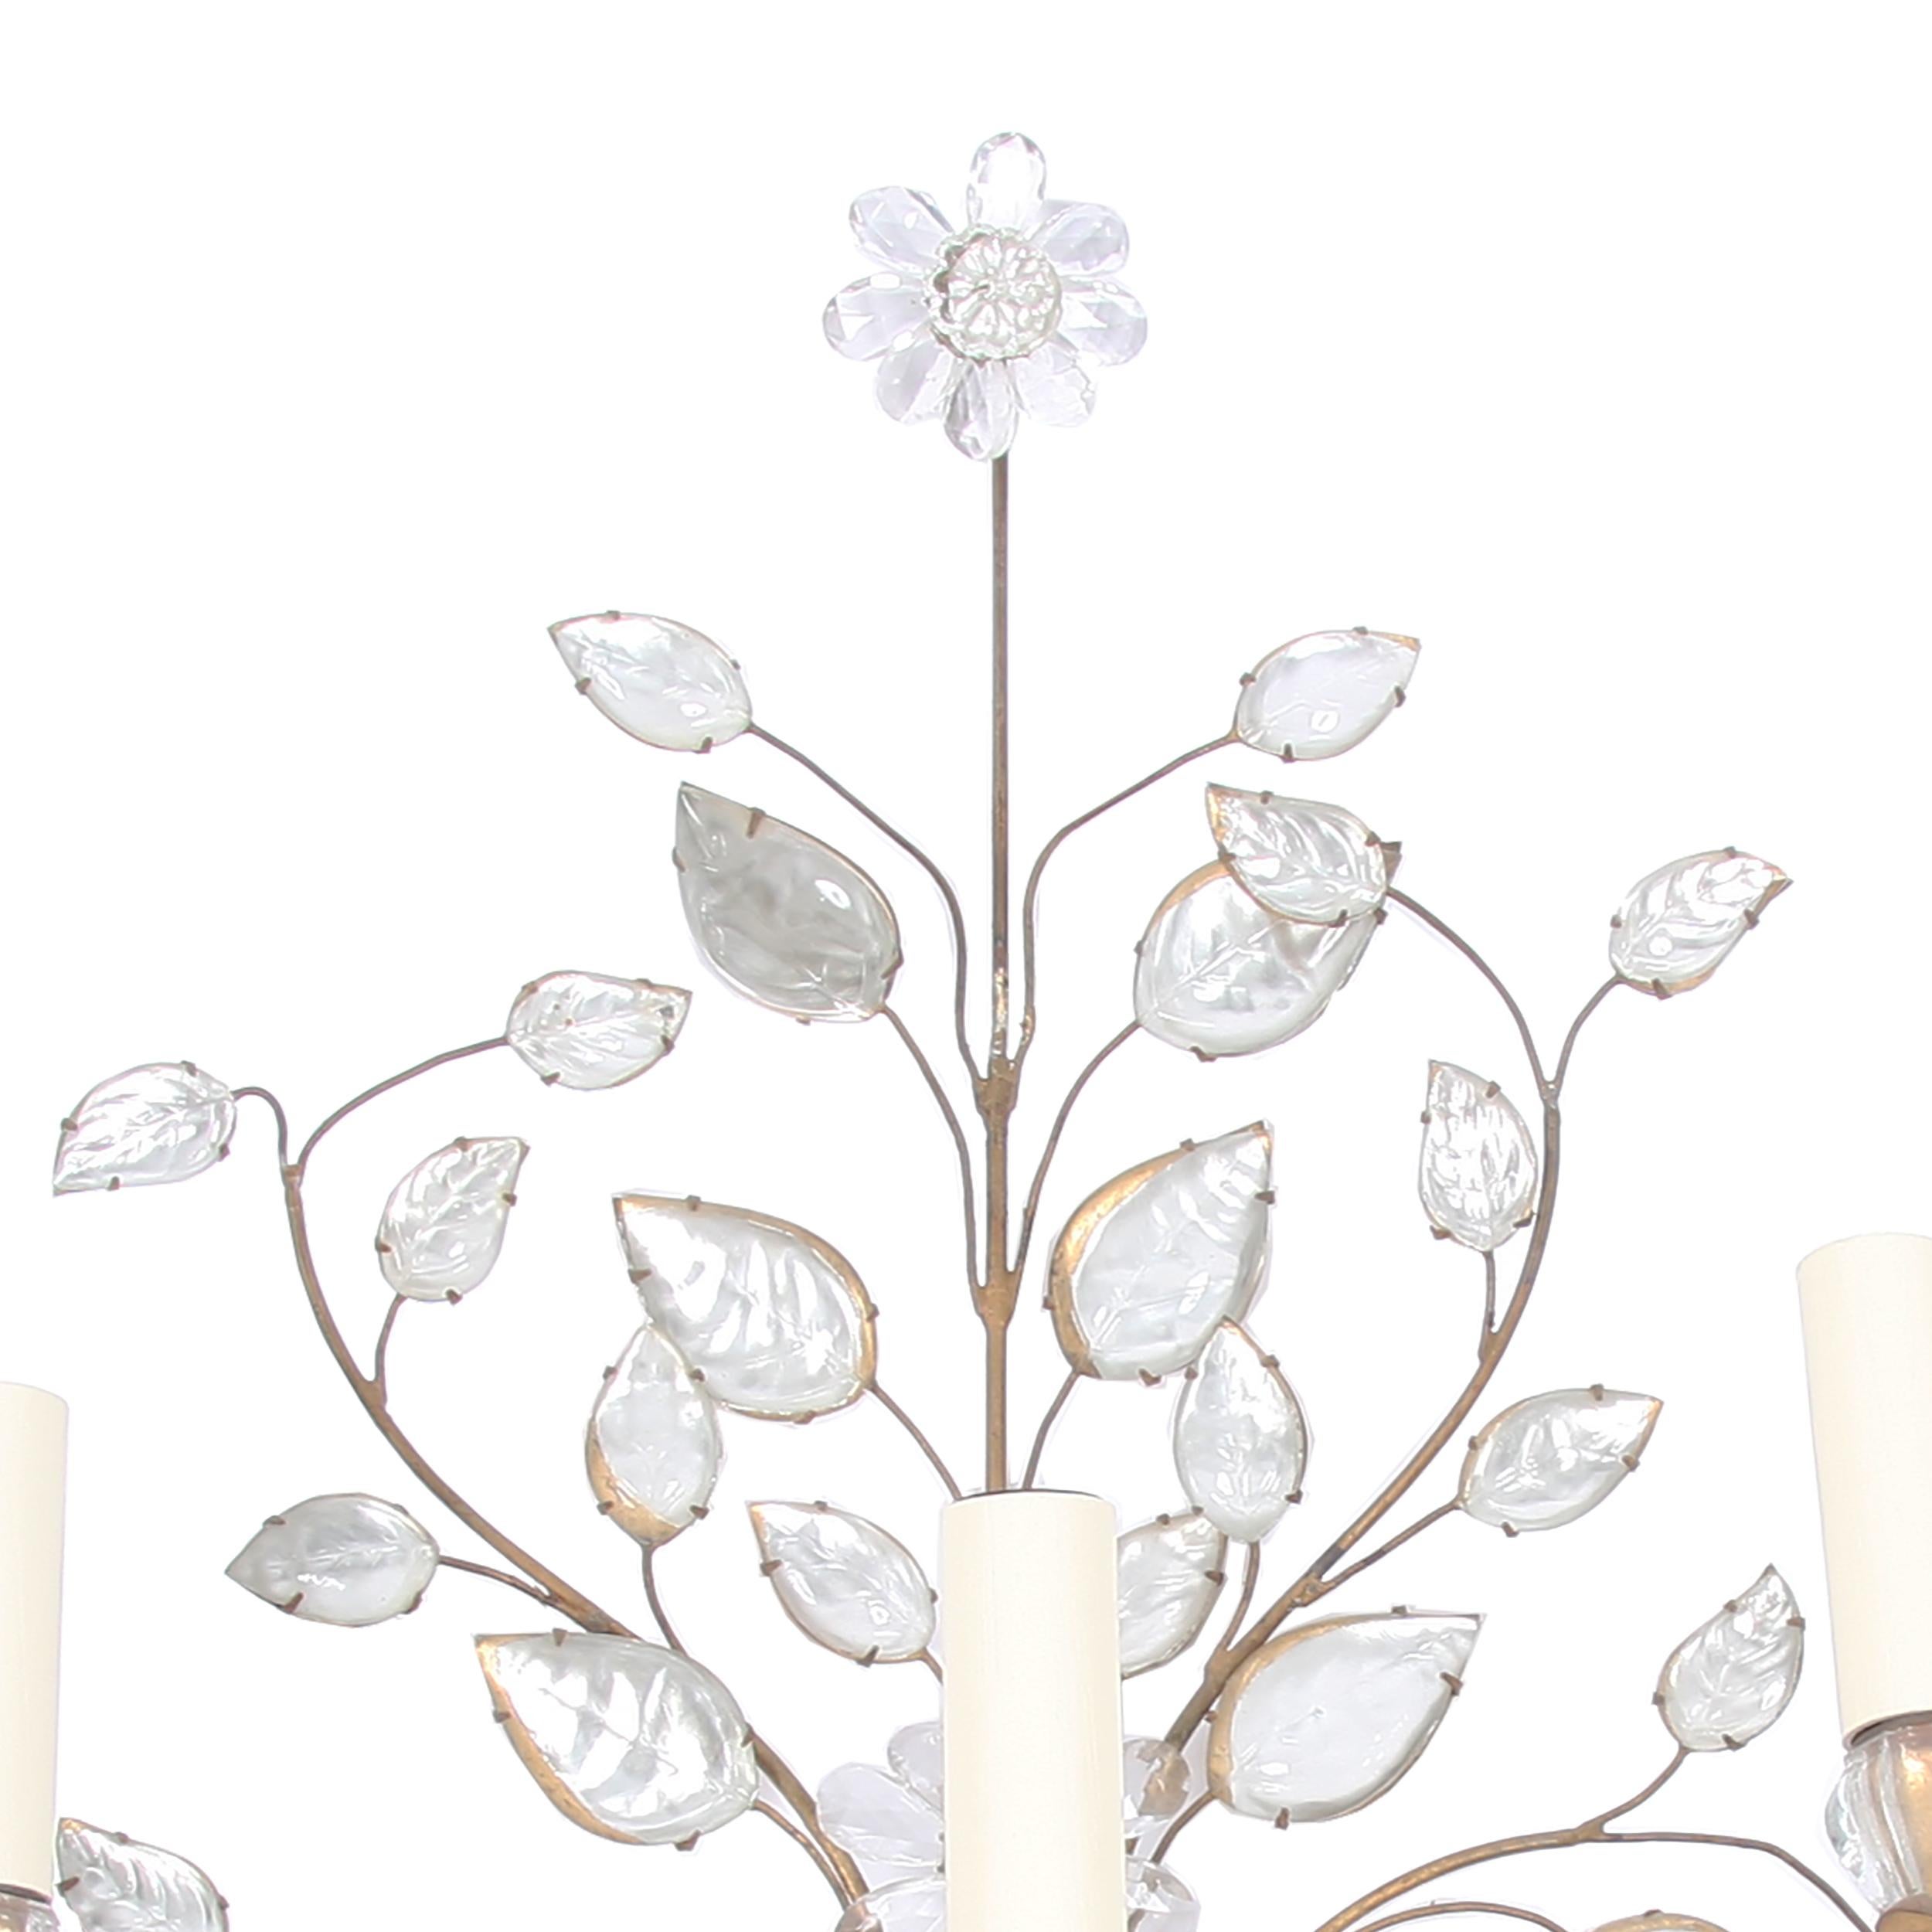 
This is a gorgeous wall sconce from Maison Baguès. Made from gilt metal and glass, with a flower and urn design.

Made in France in the 1950s. Stunning.

Since the 1860s, the renowned French luxury lighting atelier Maison Baguès has been